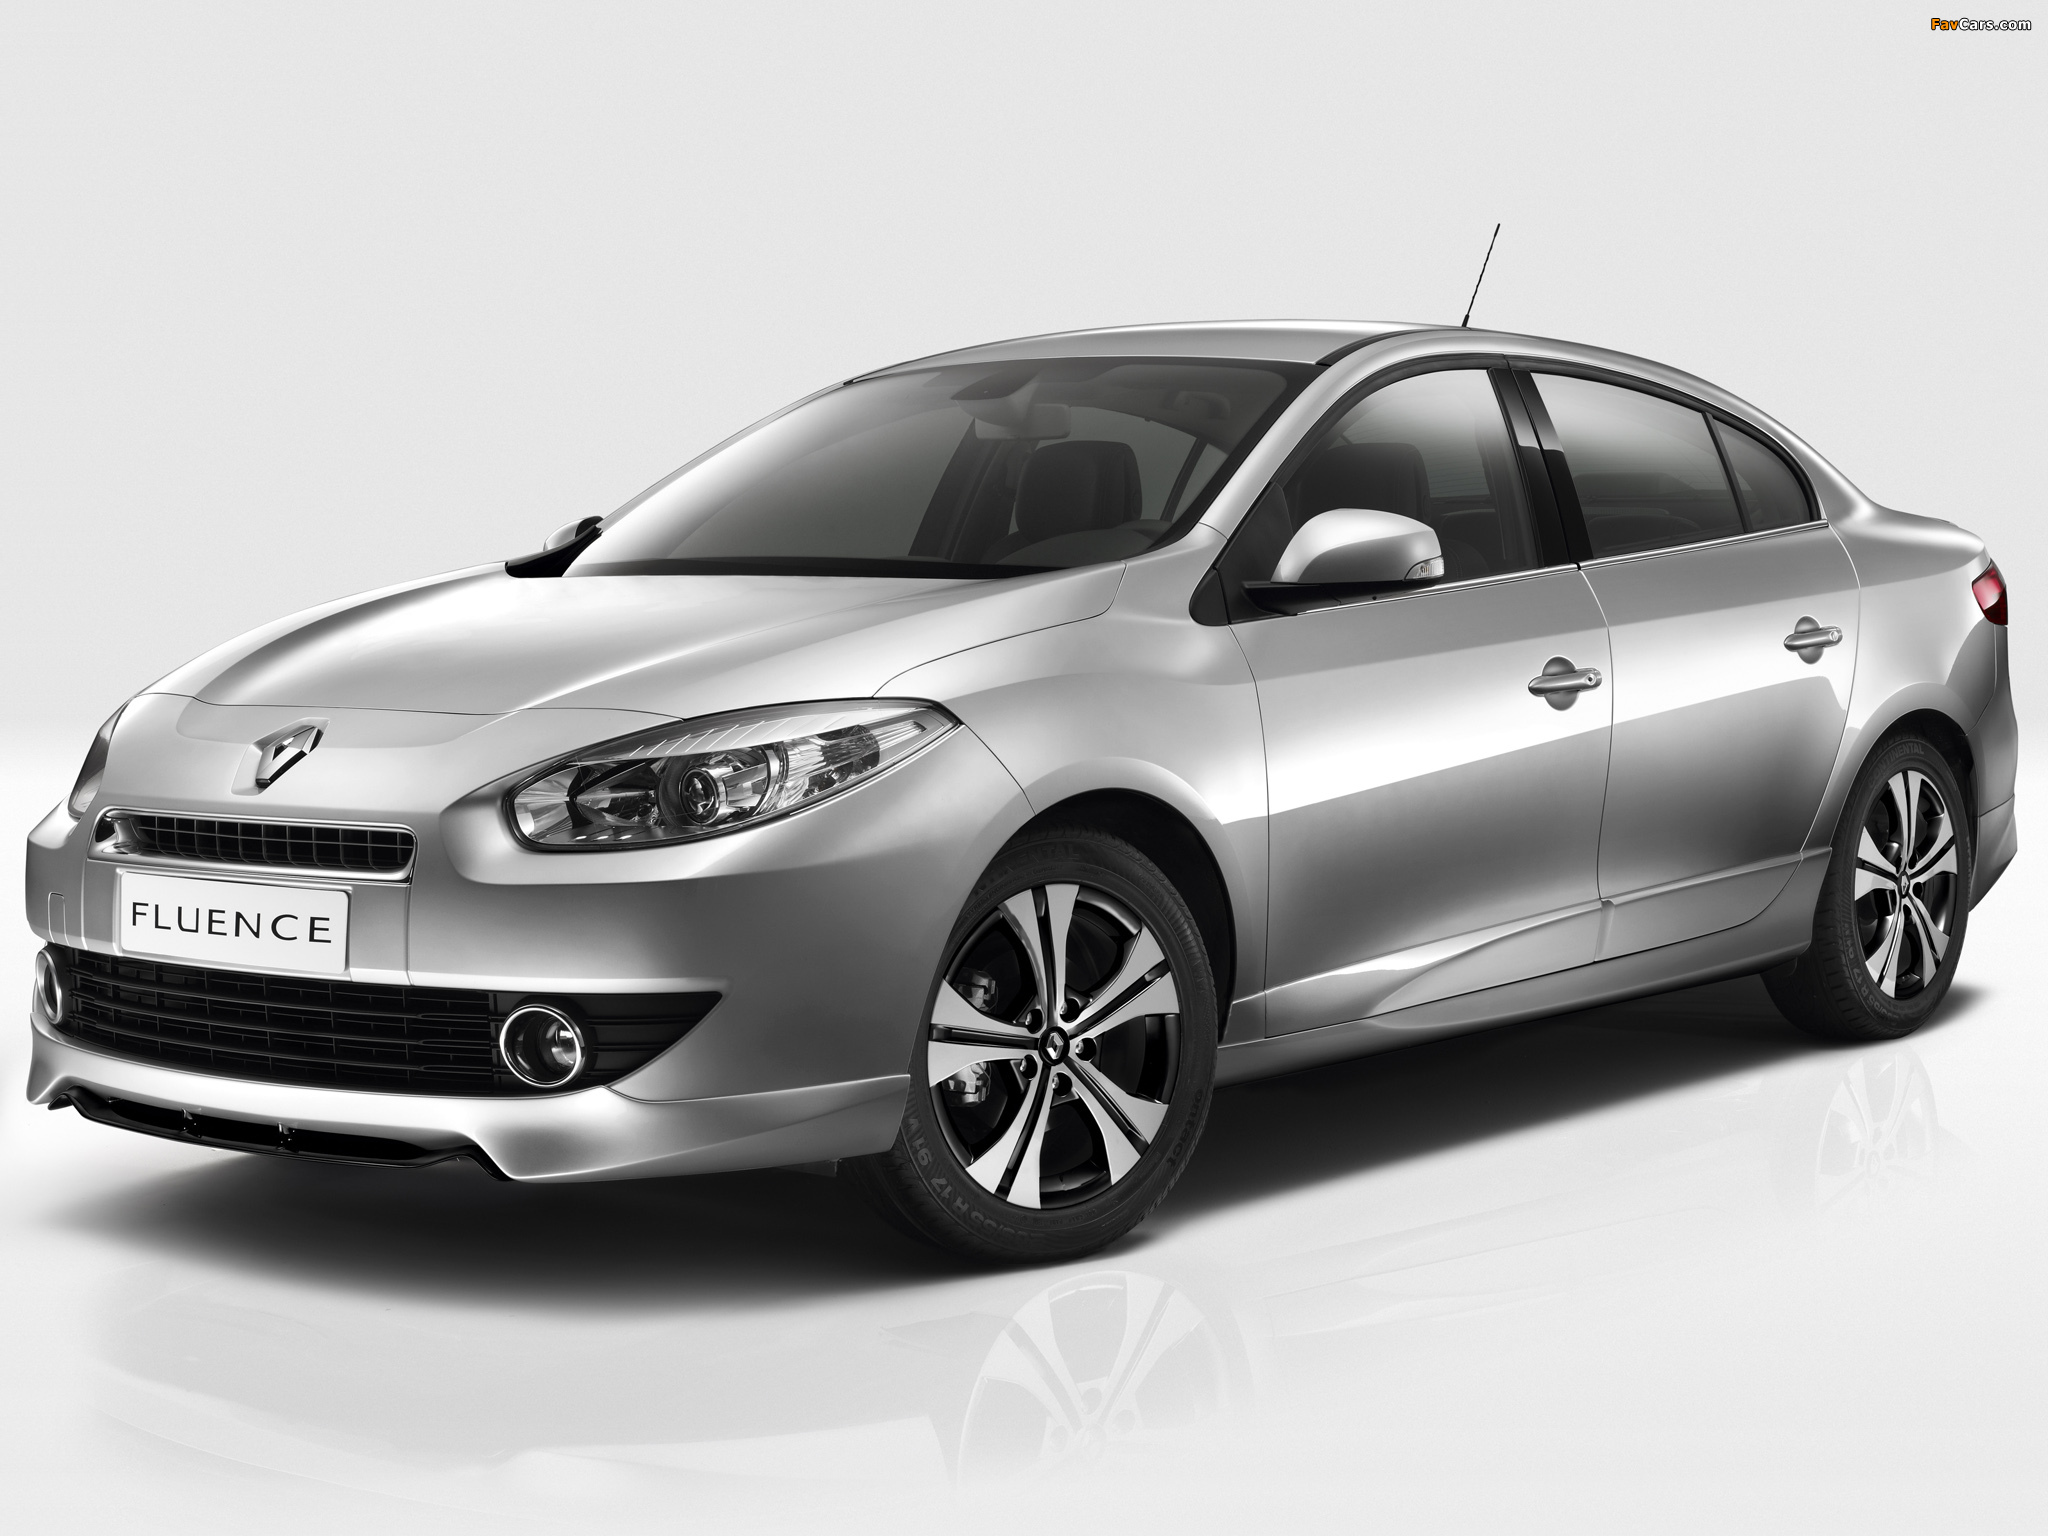 Renault Fluence Black Edition 2012 pictures (2048 x 1536)